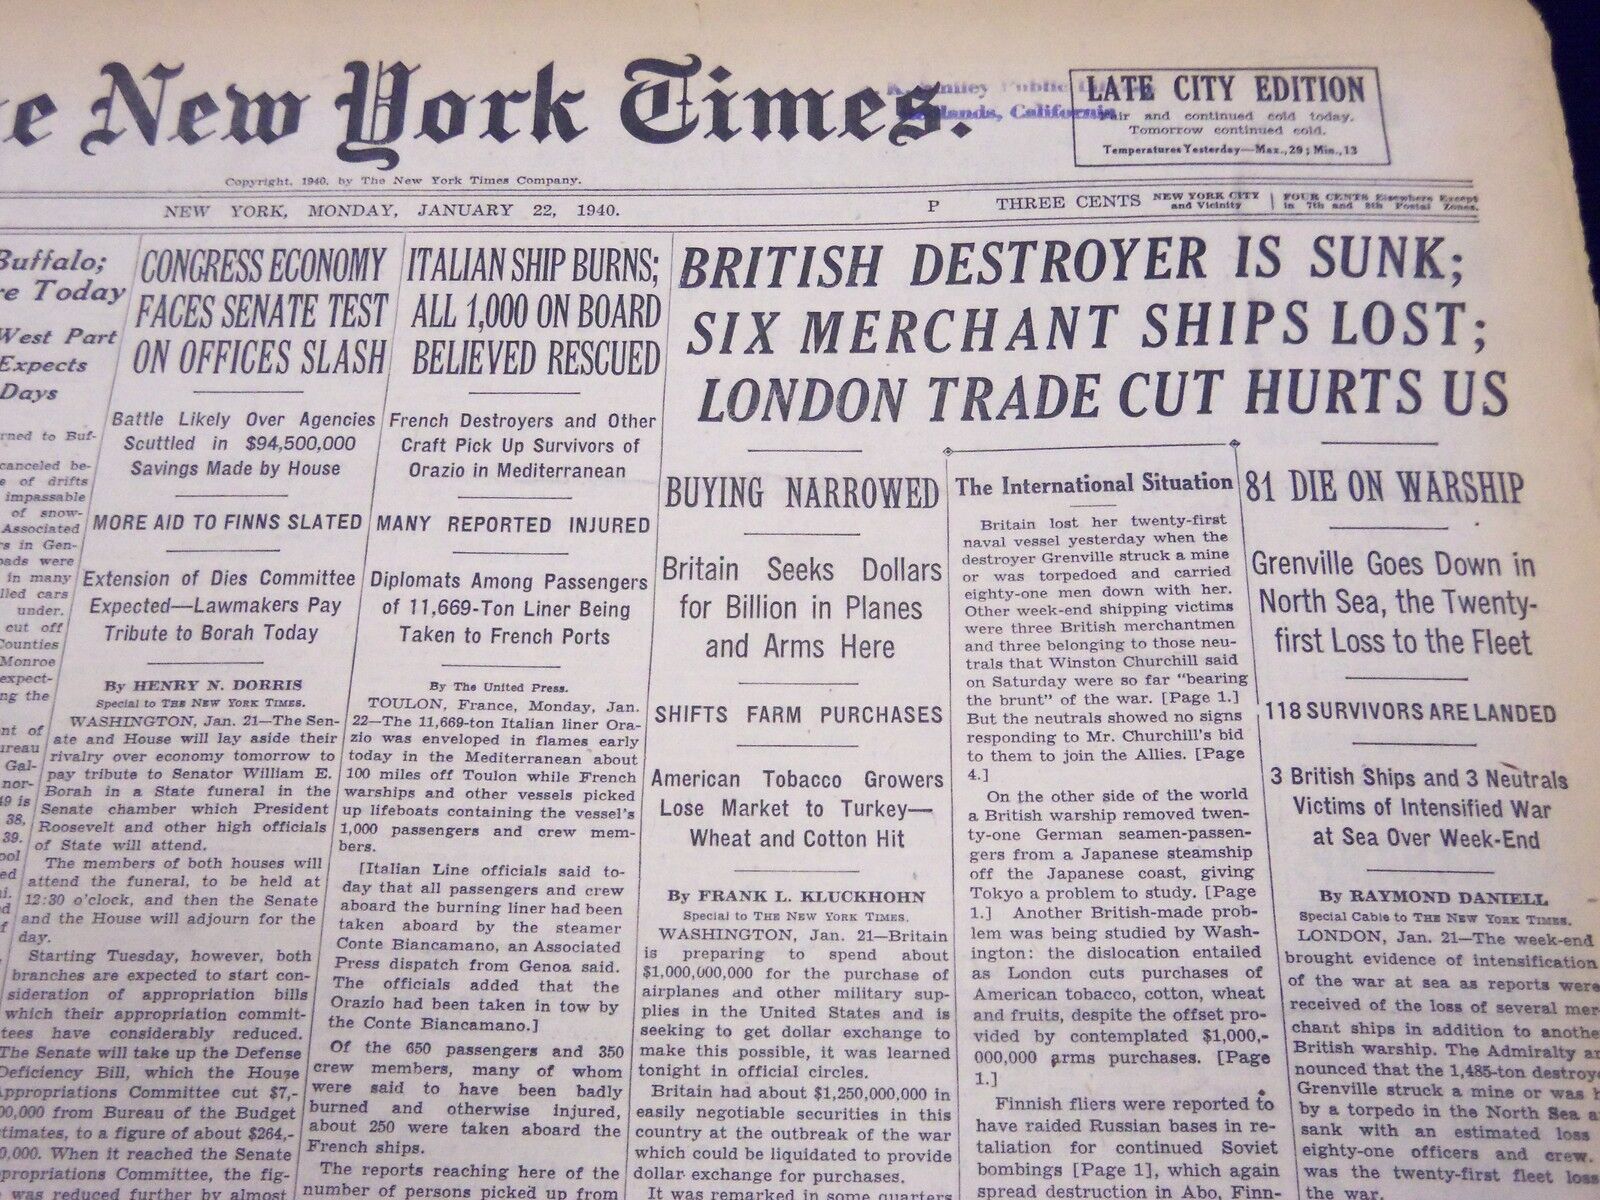 1940 JANUARY 22 NEW YORK TIMES - BRITISH DESTROYER IS SUNK - NT 208